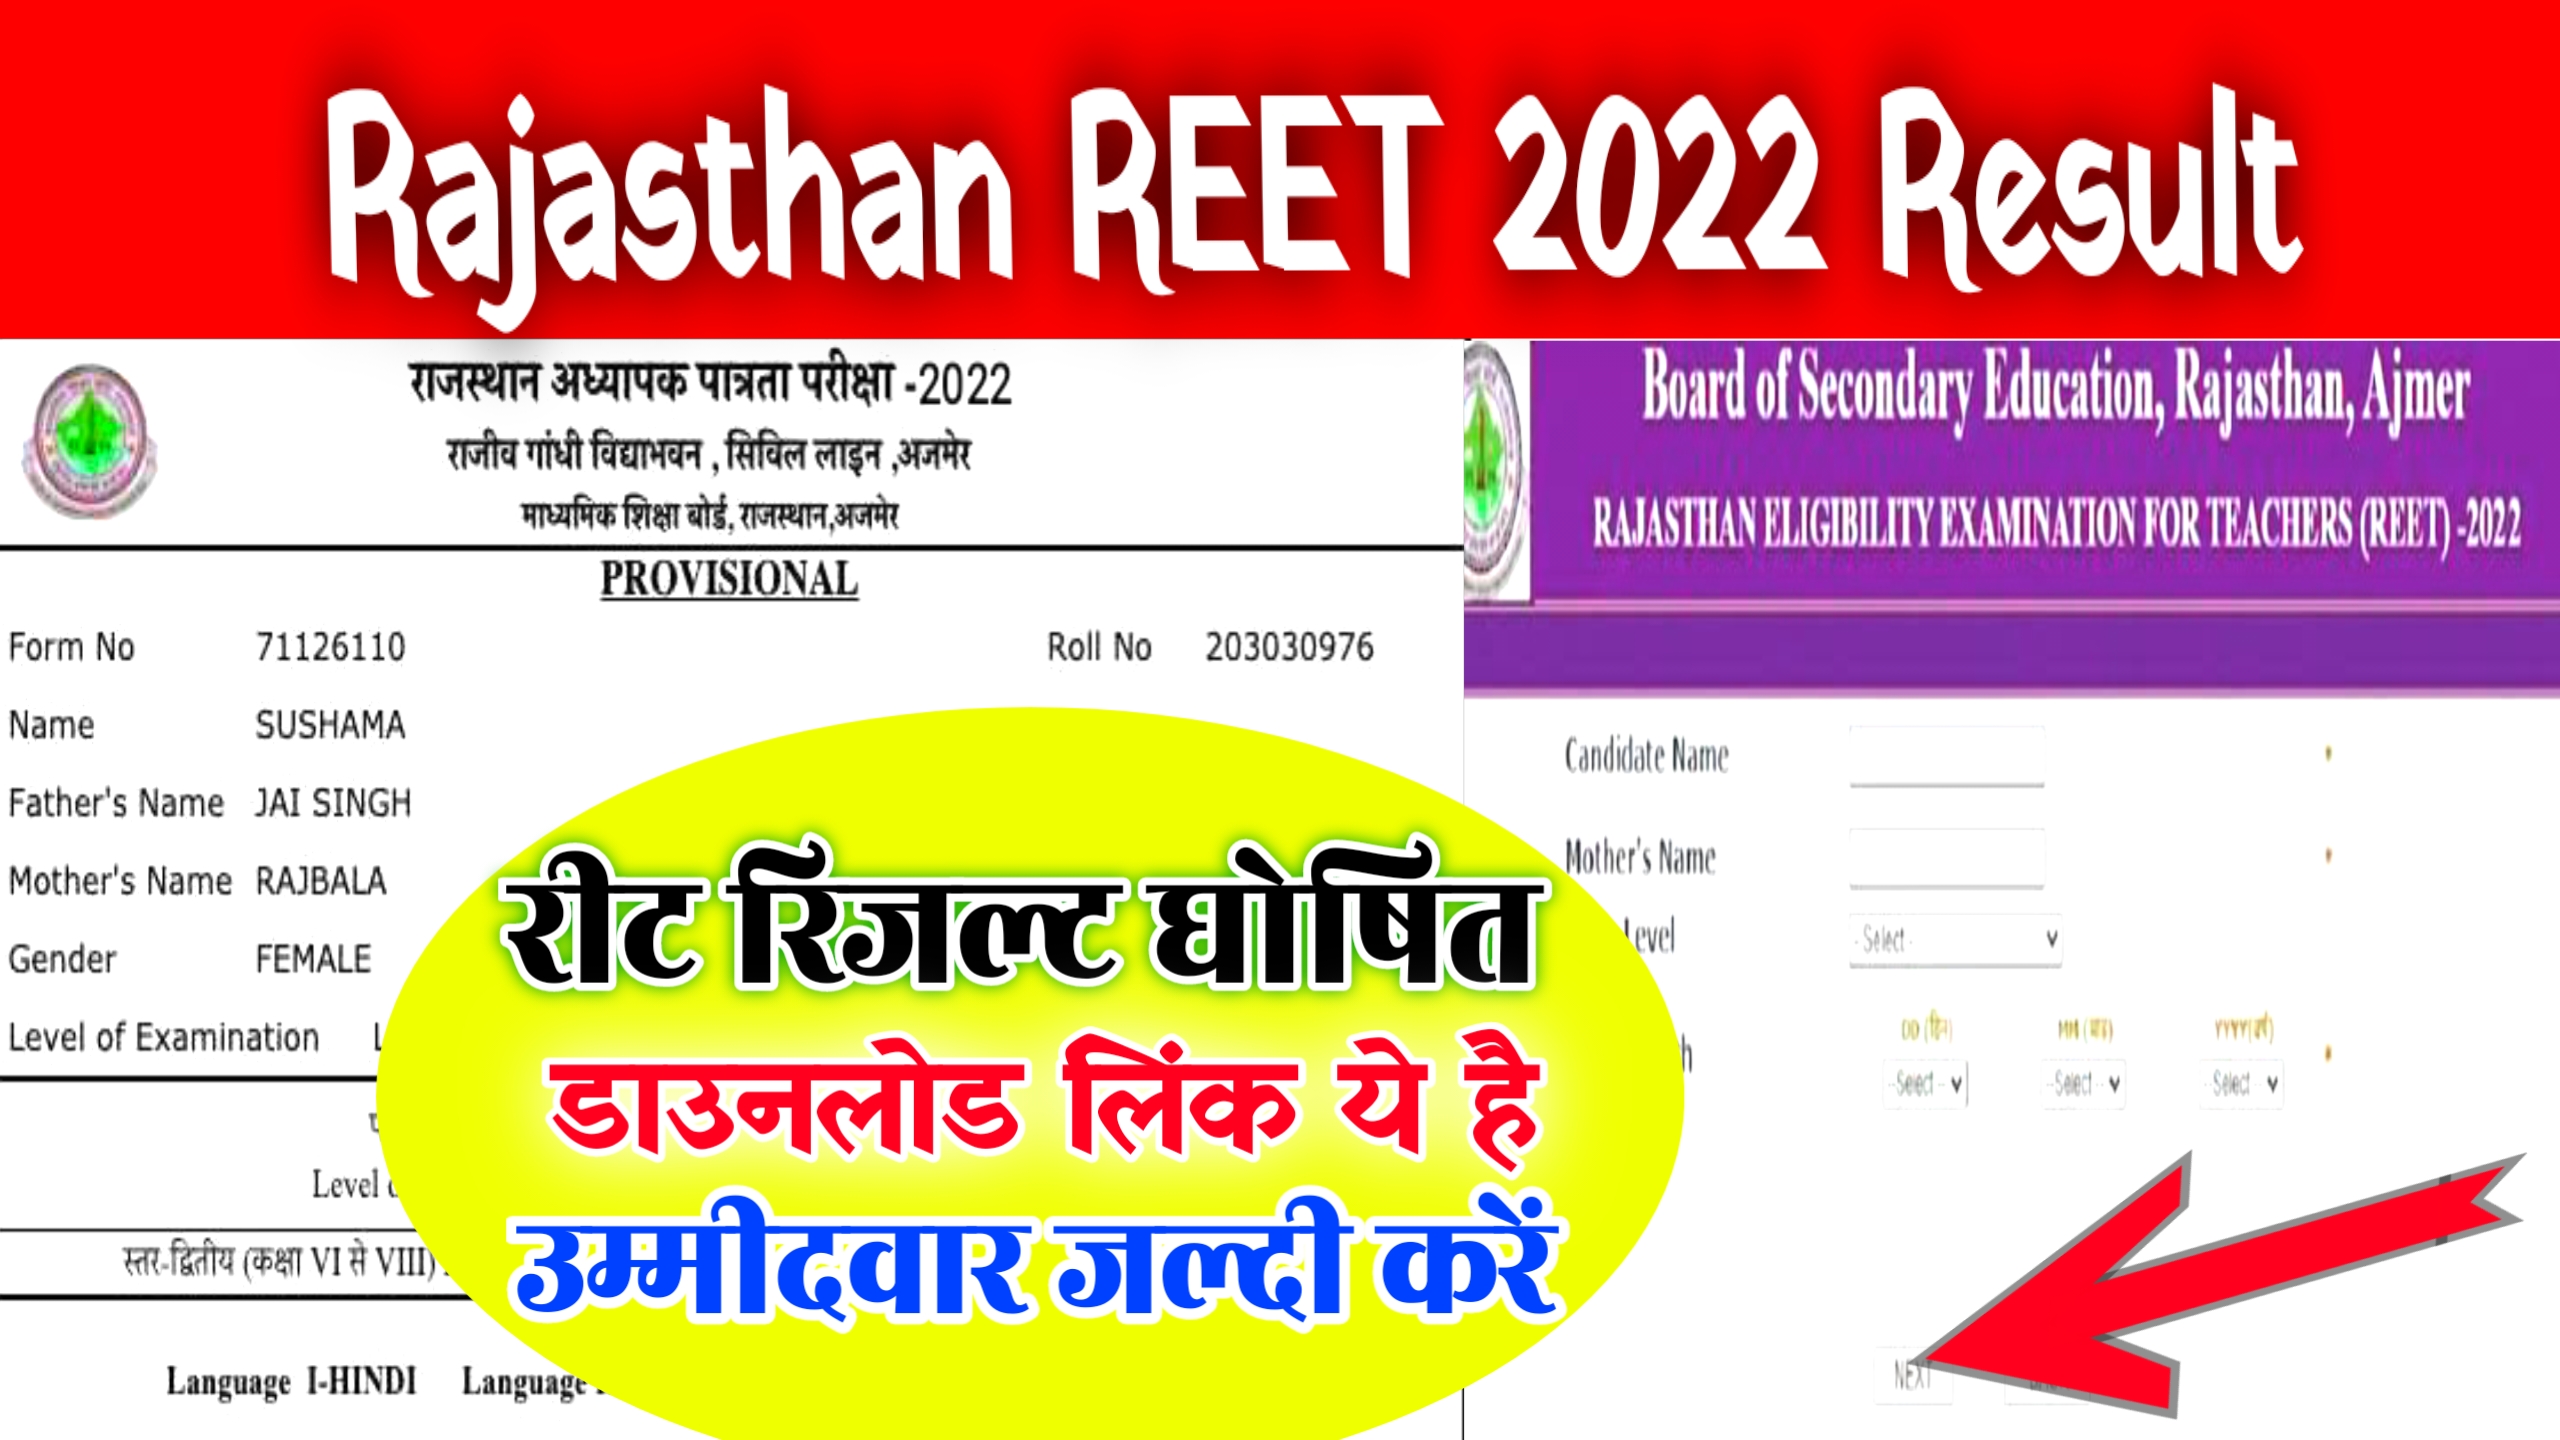 Reet 2022 Result Out Now : @reetbser22.in Scorecard,Cutoff marks